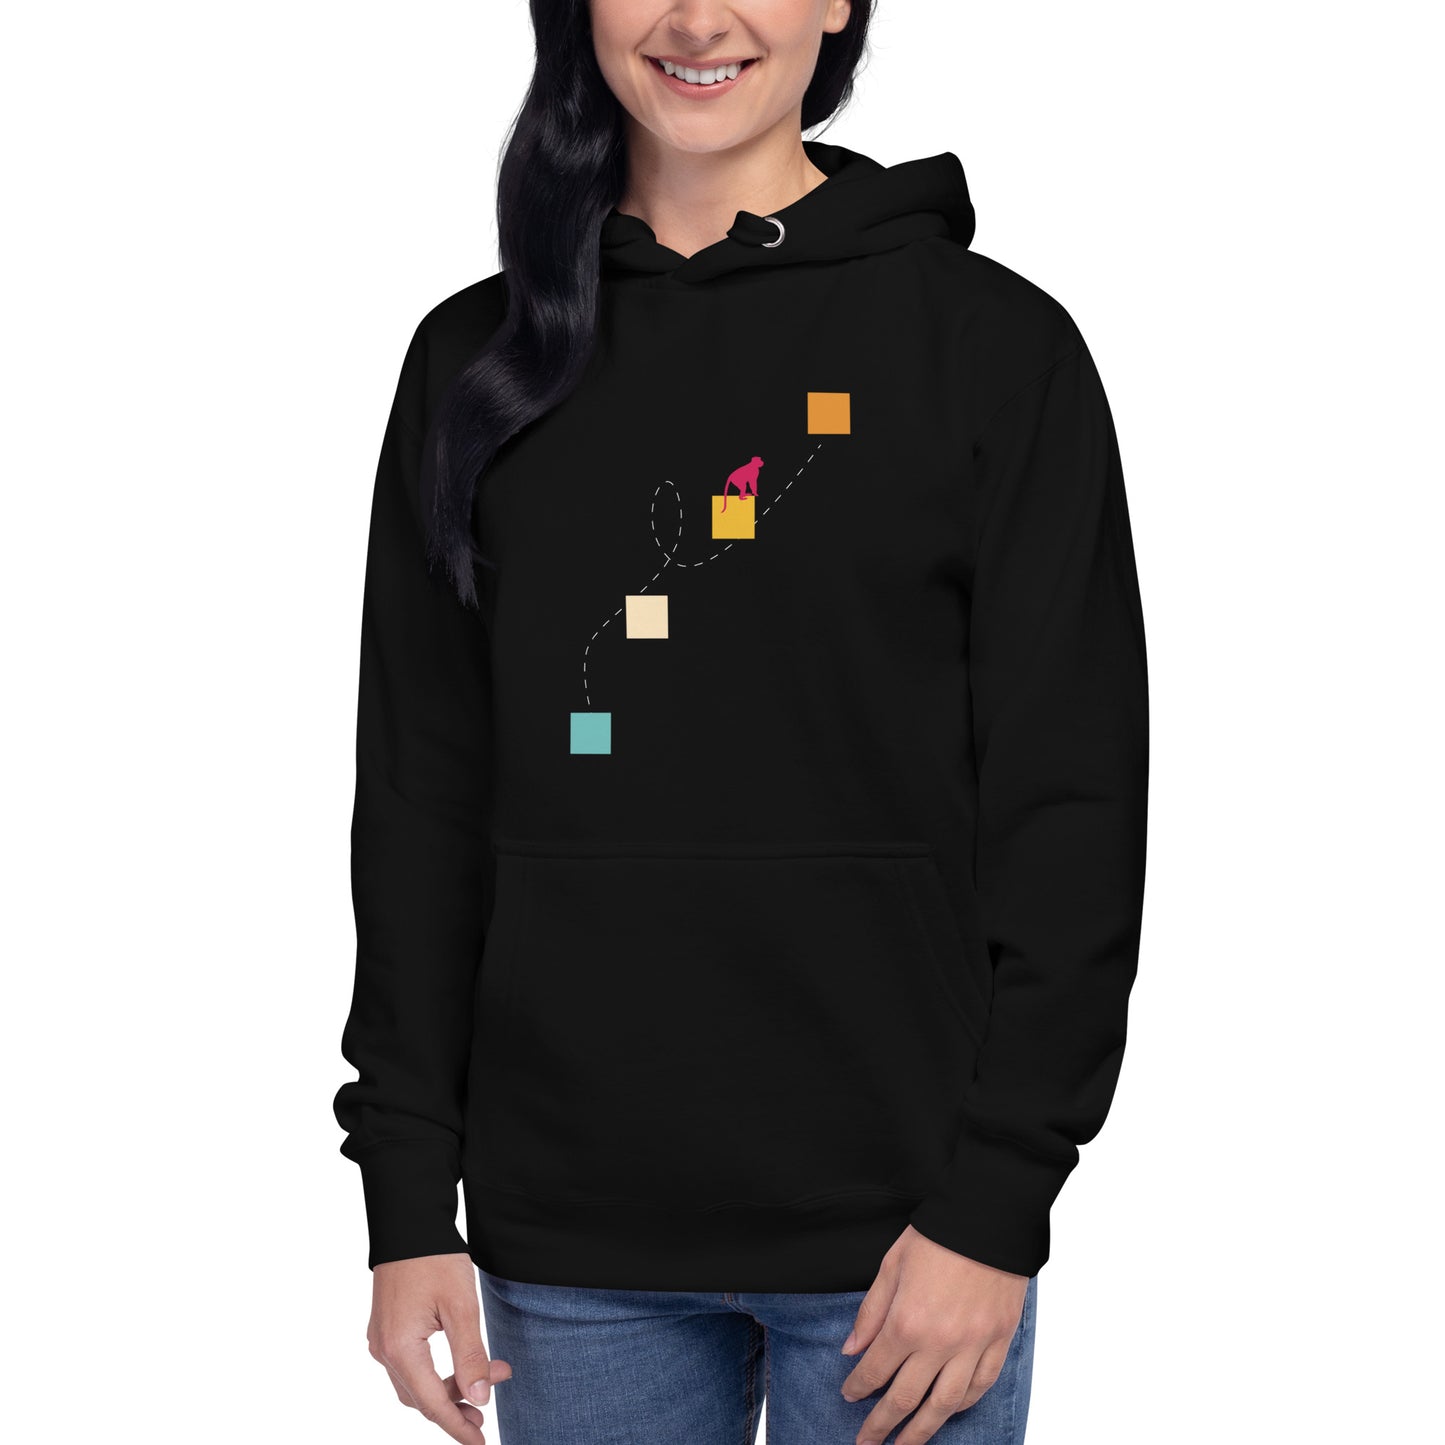 NEVER GIVE UP Hoodie